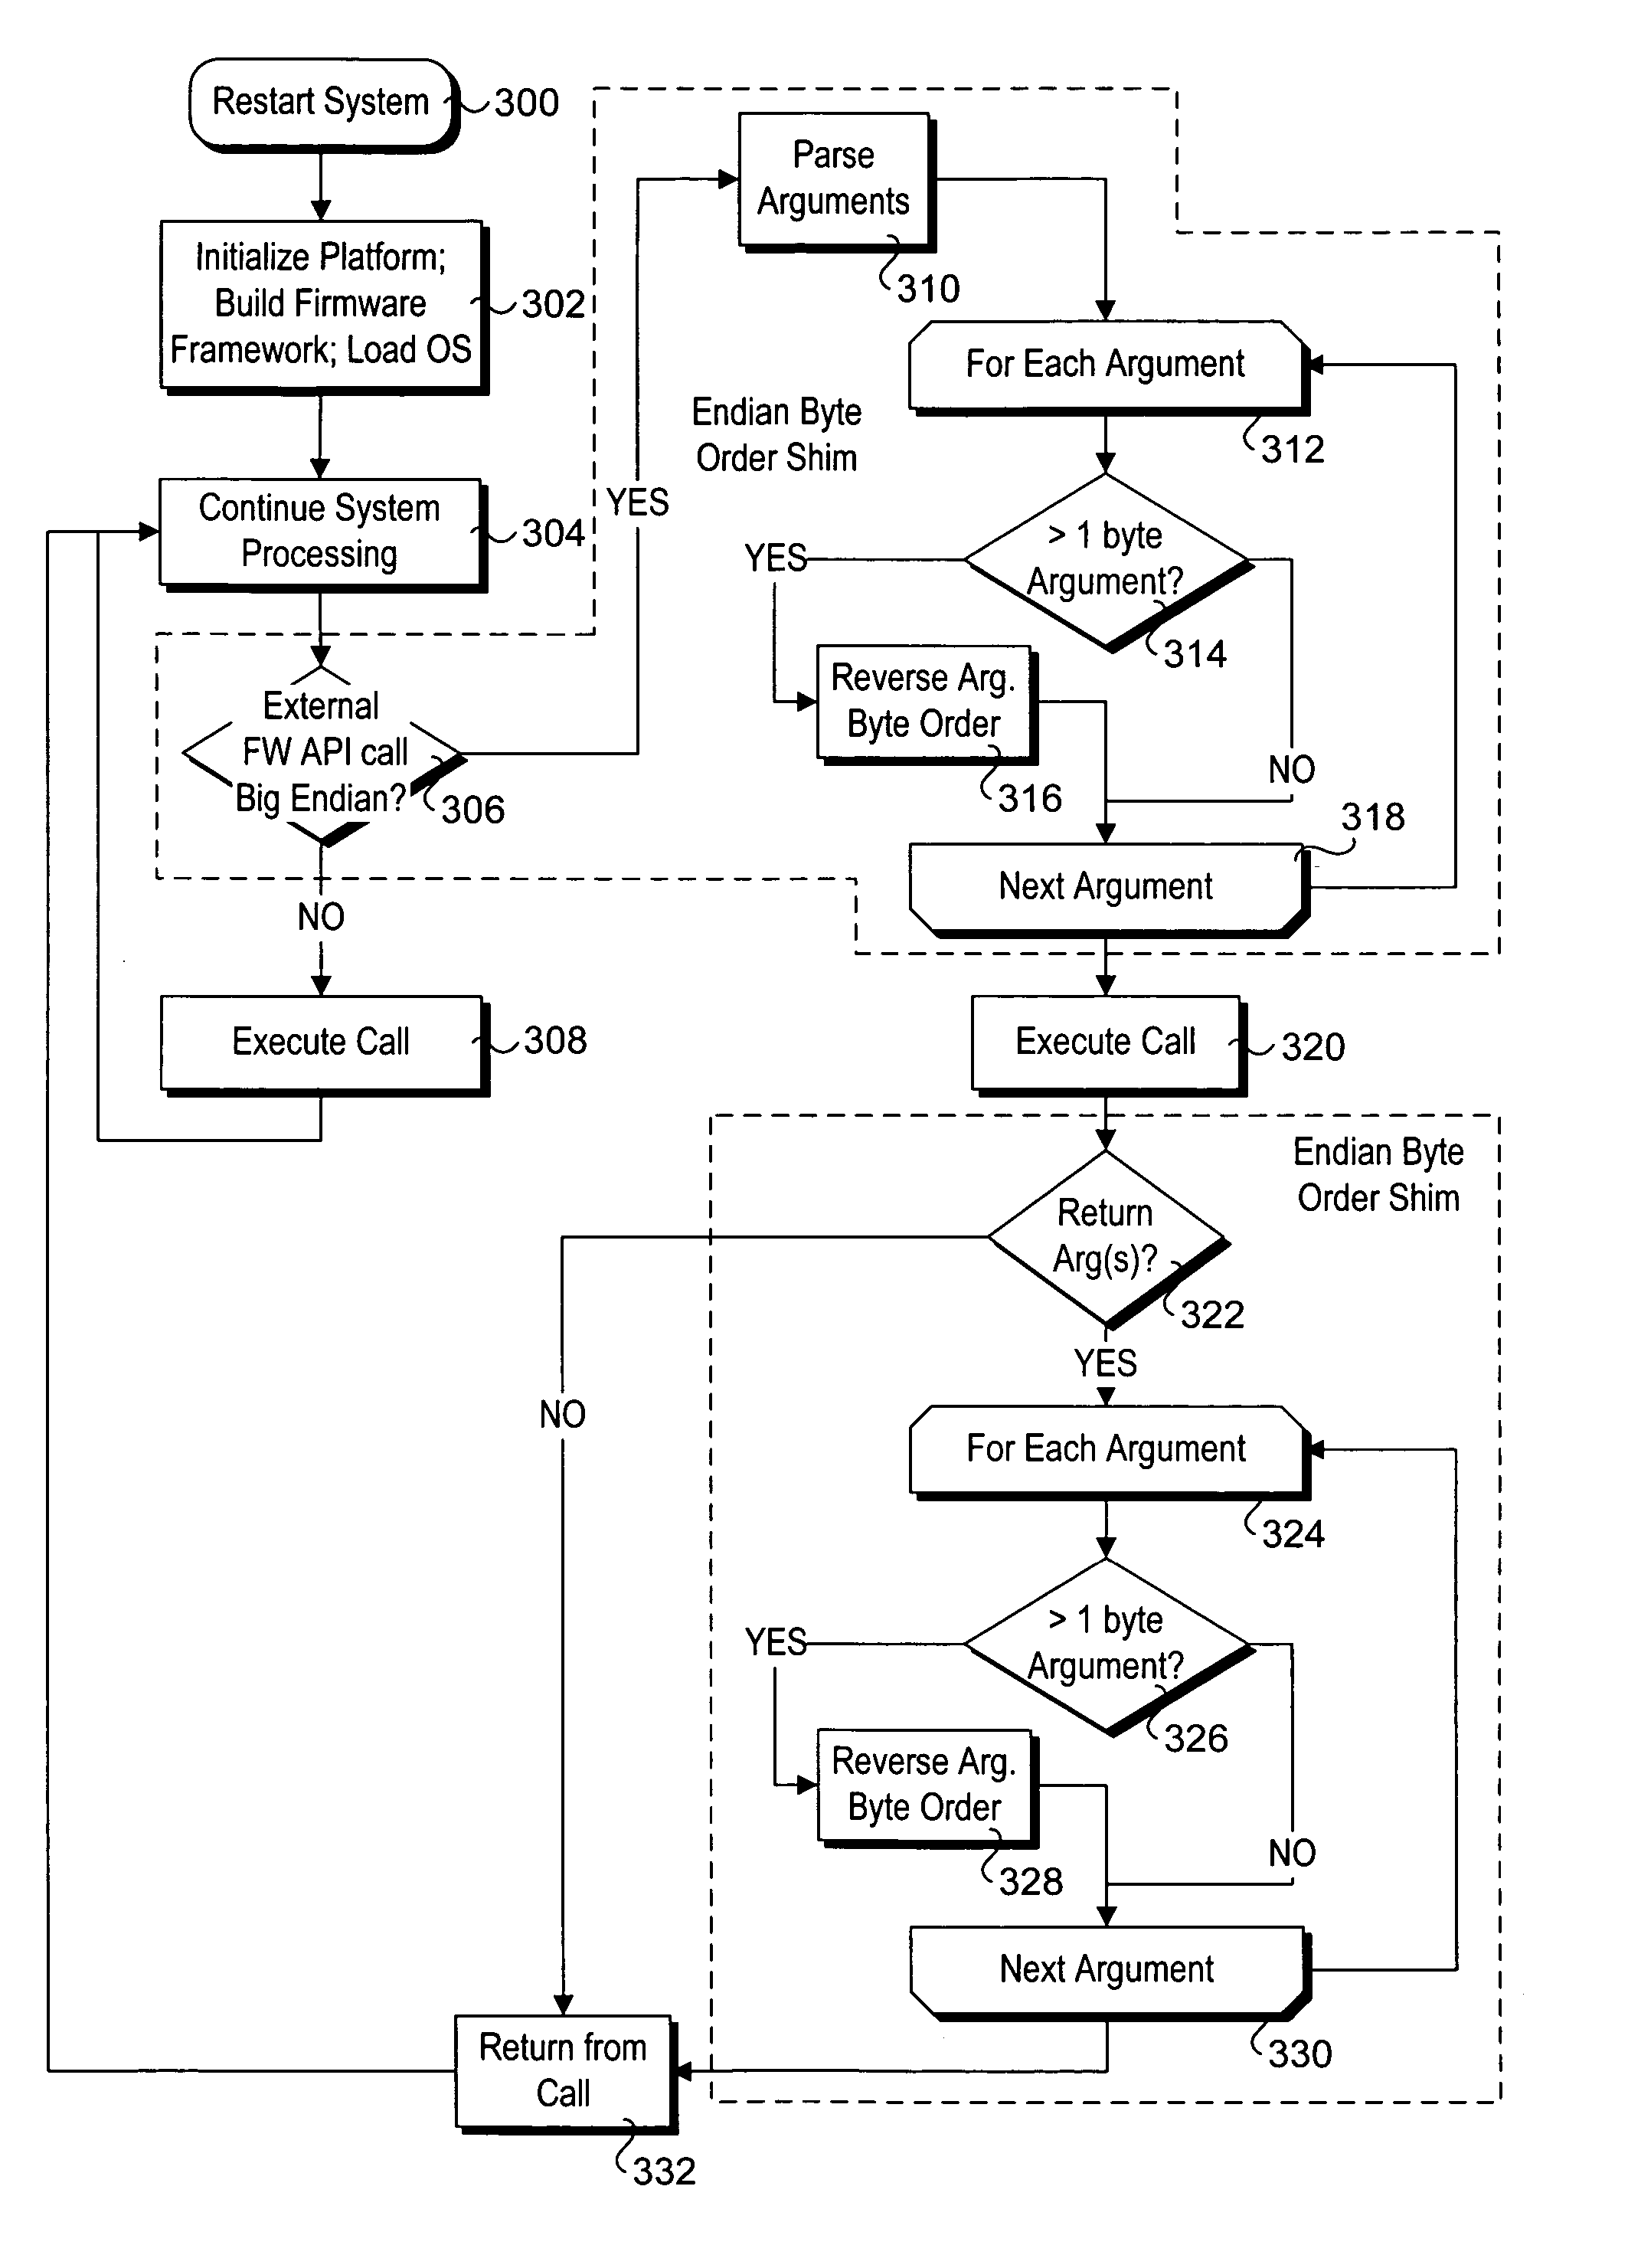 Mechanisms to support use of software running on platform hardware employing different endianness